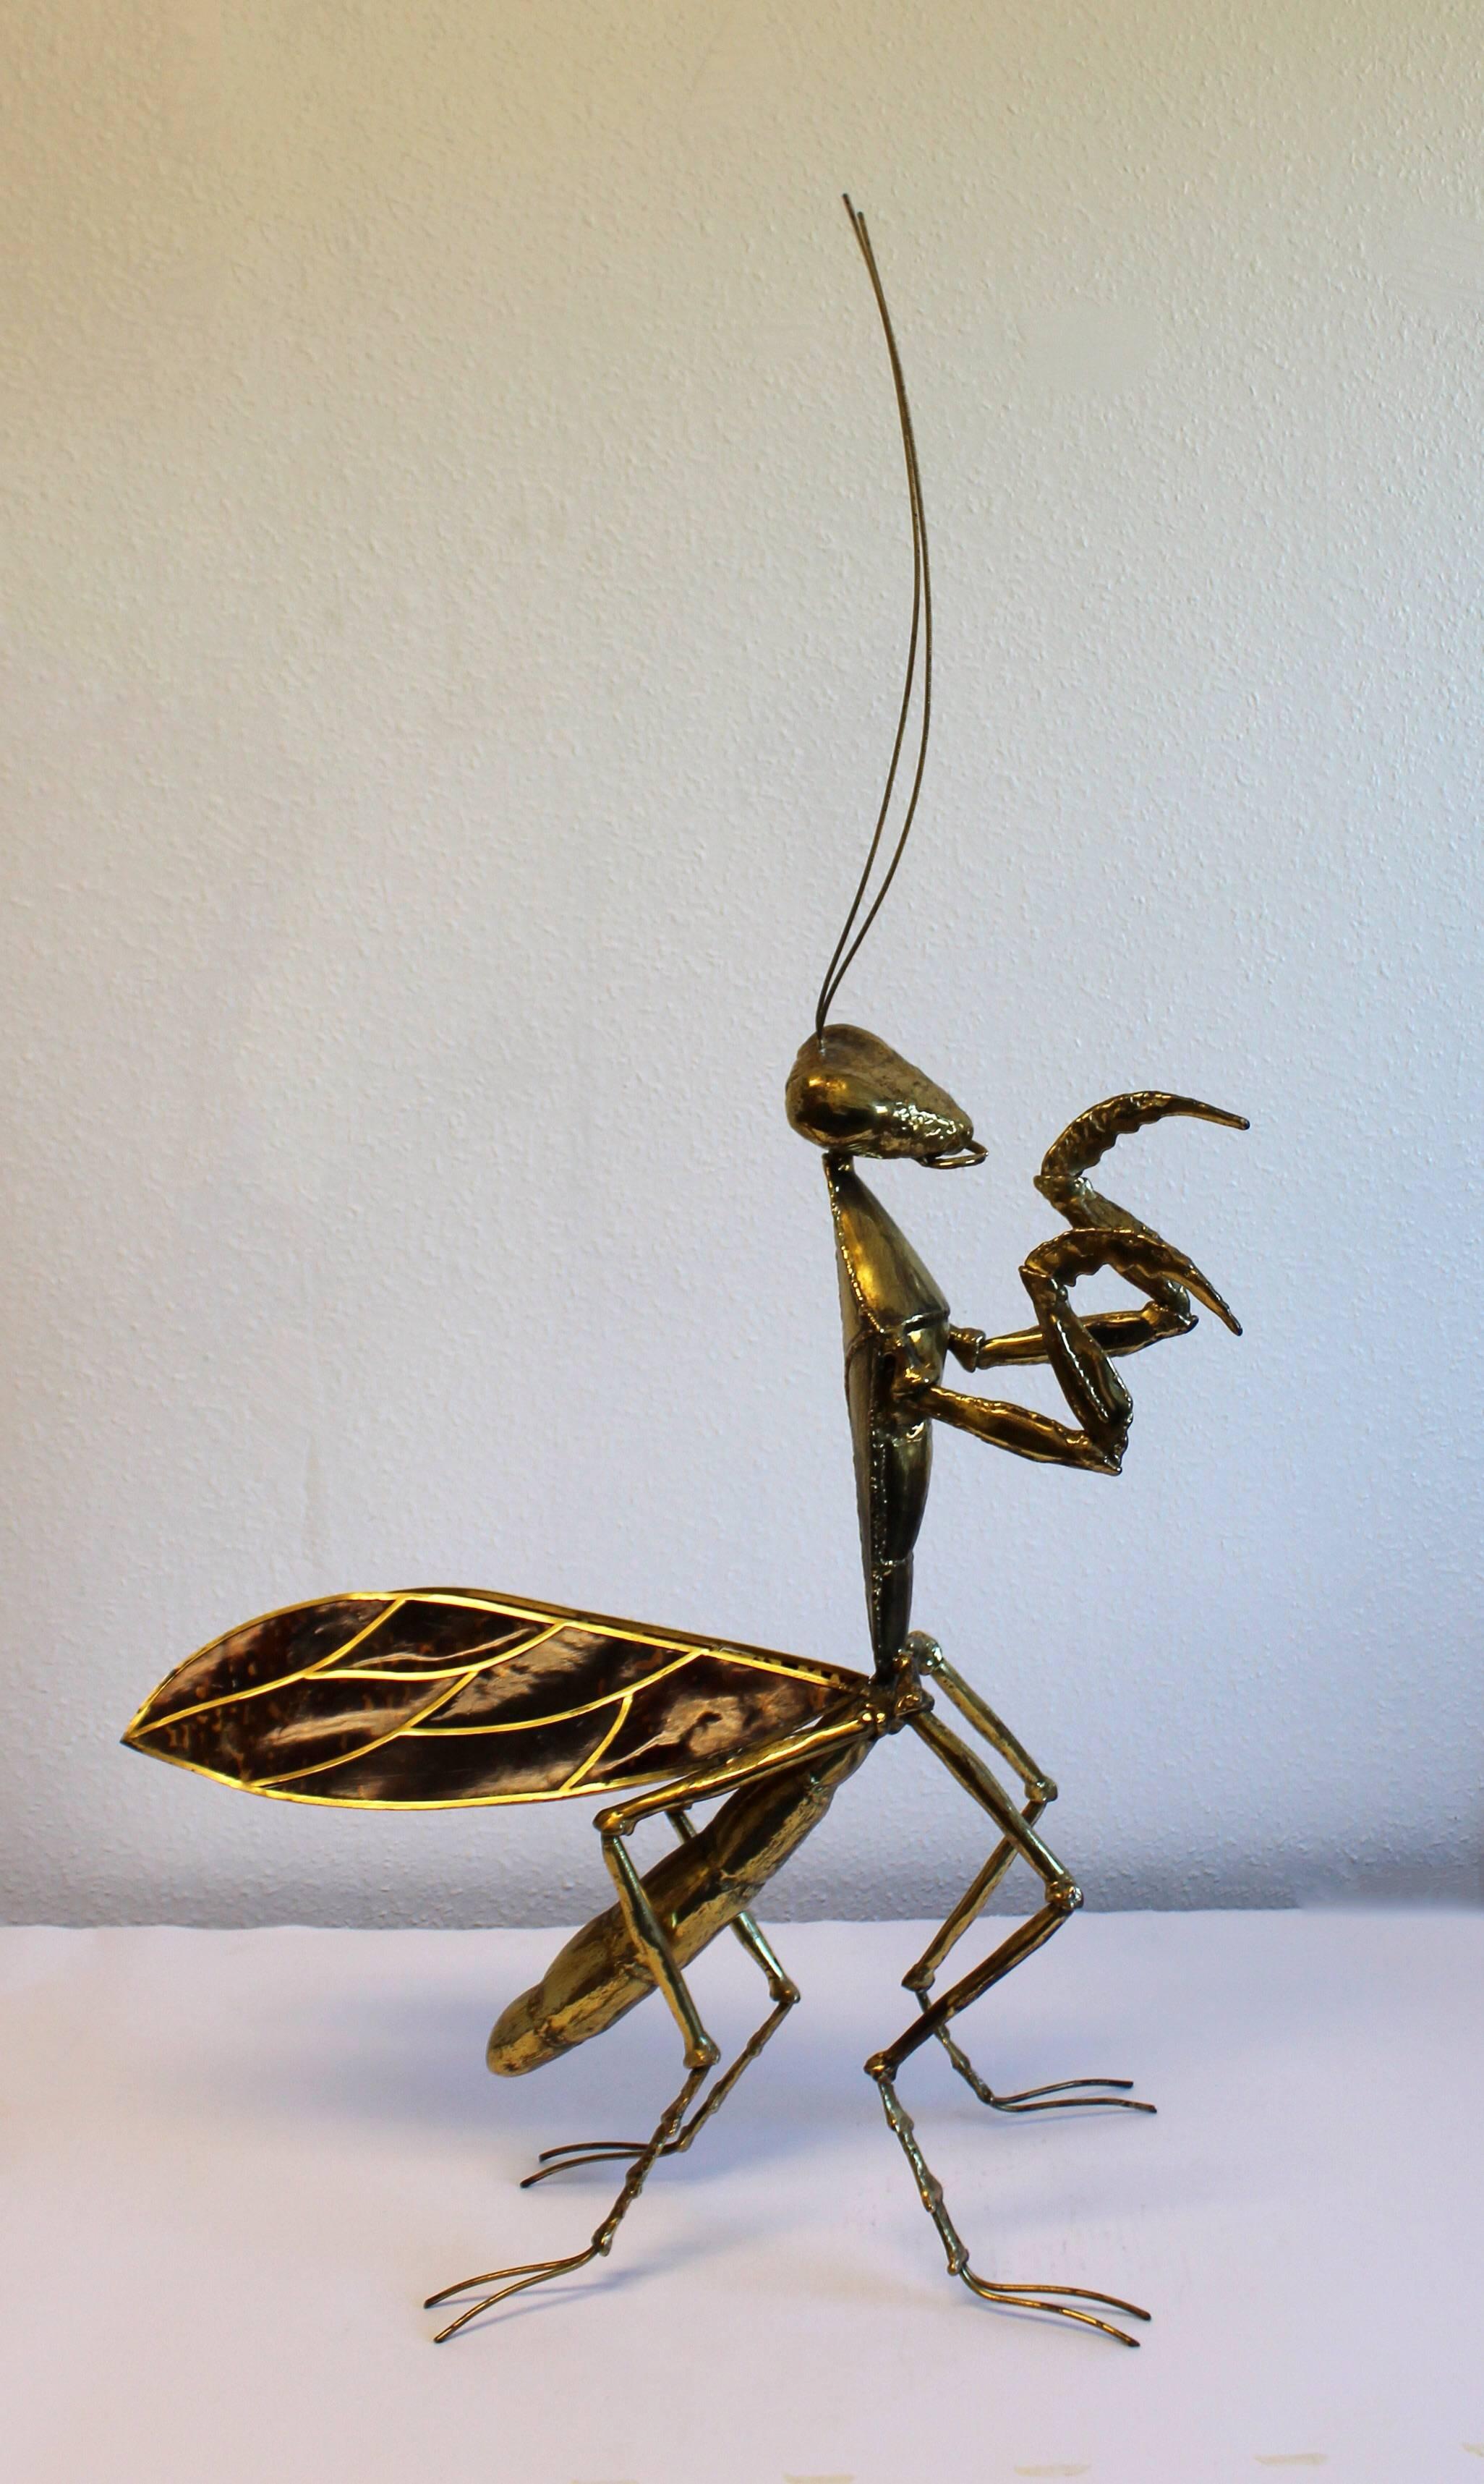 Amazing work of art by Jacques Duval Brasseur. The large sculpture is of a brass praying mantis with celluloid wings. Comes with original paperwork. In great condition. The dimensions are 8" W x 25" D x 45" H.
   